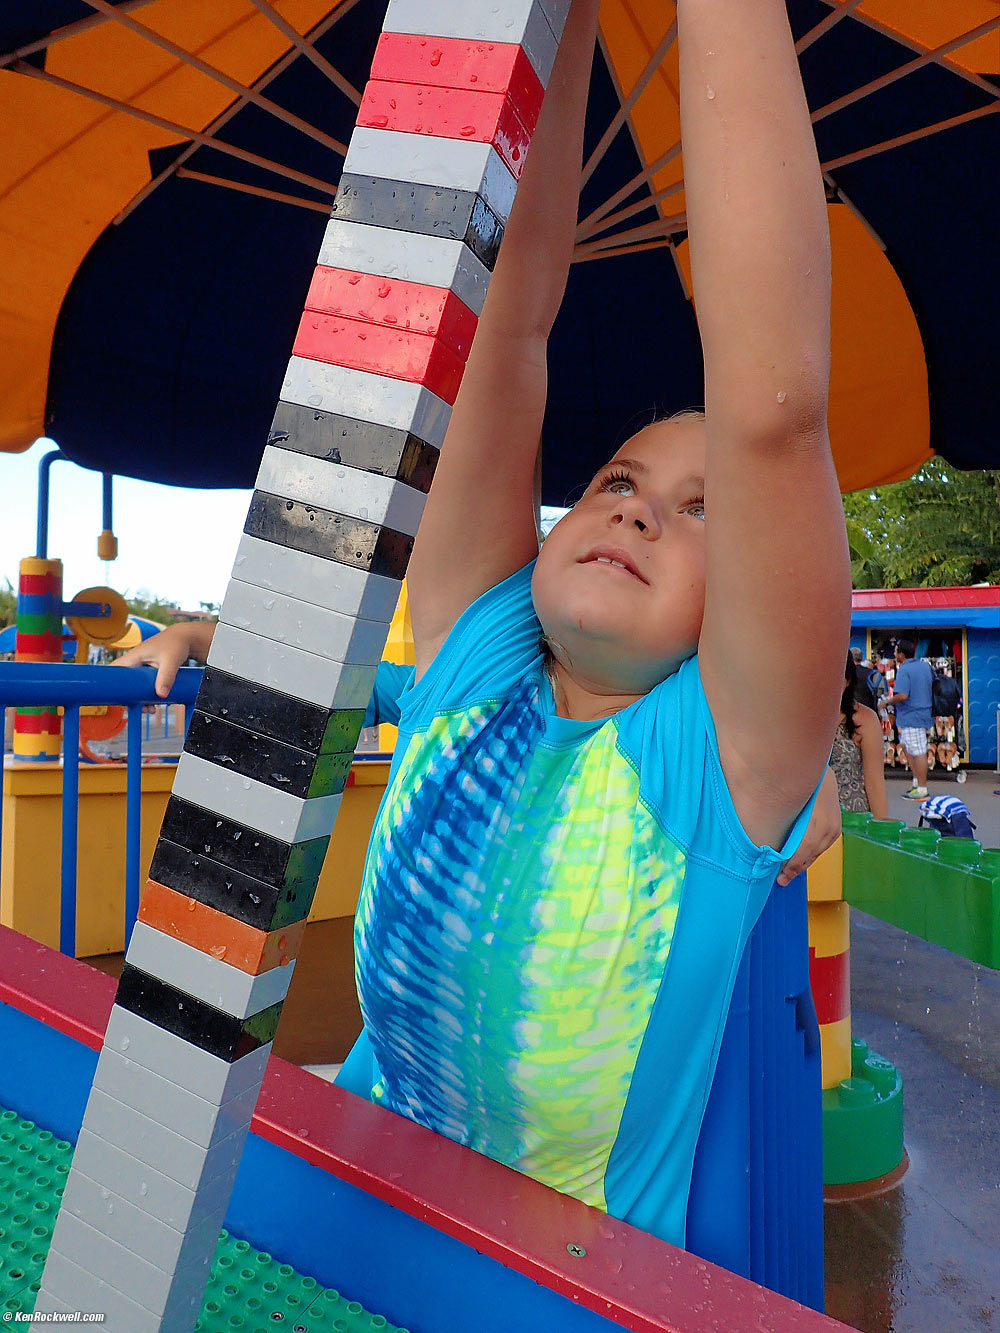 Katie makes a tall tower at the Legoland water table.